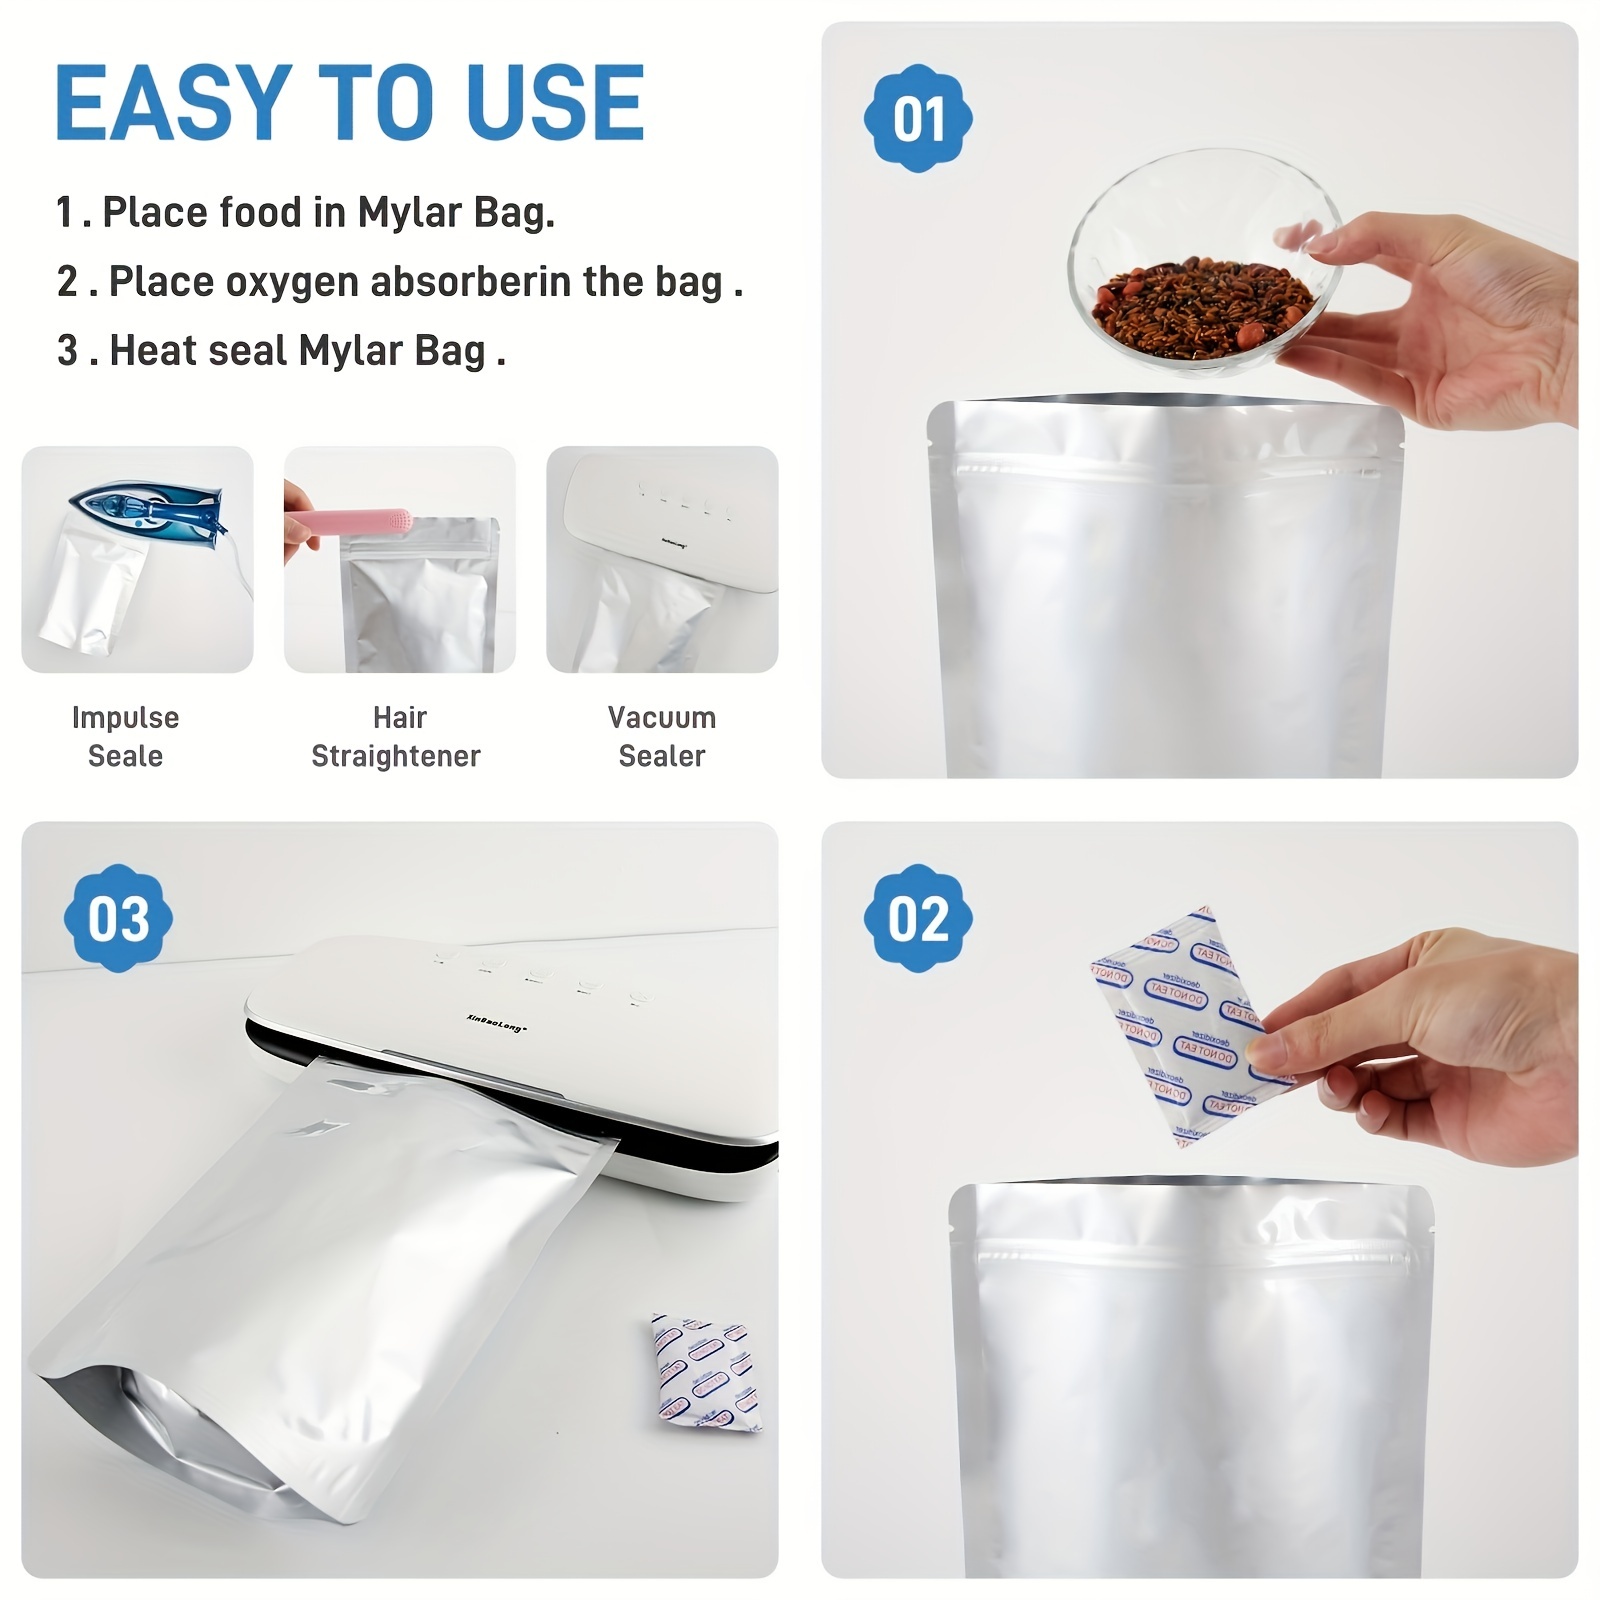 Stand up Resealable Zipper Heat Sealable Mylar Bag Plastic